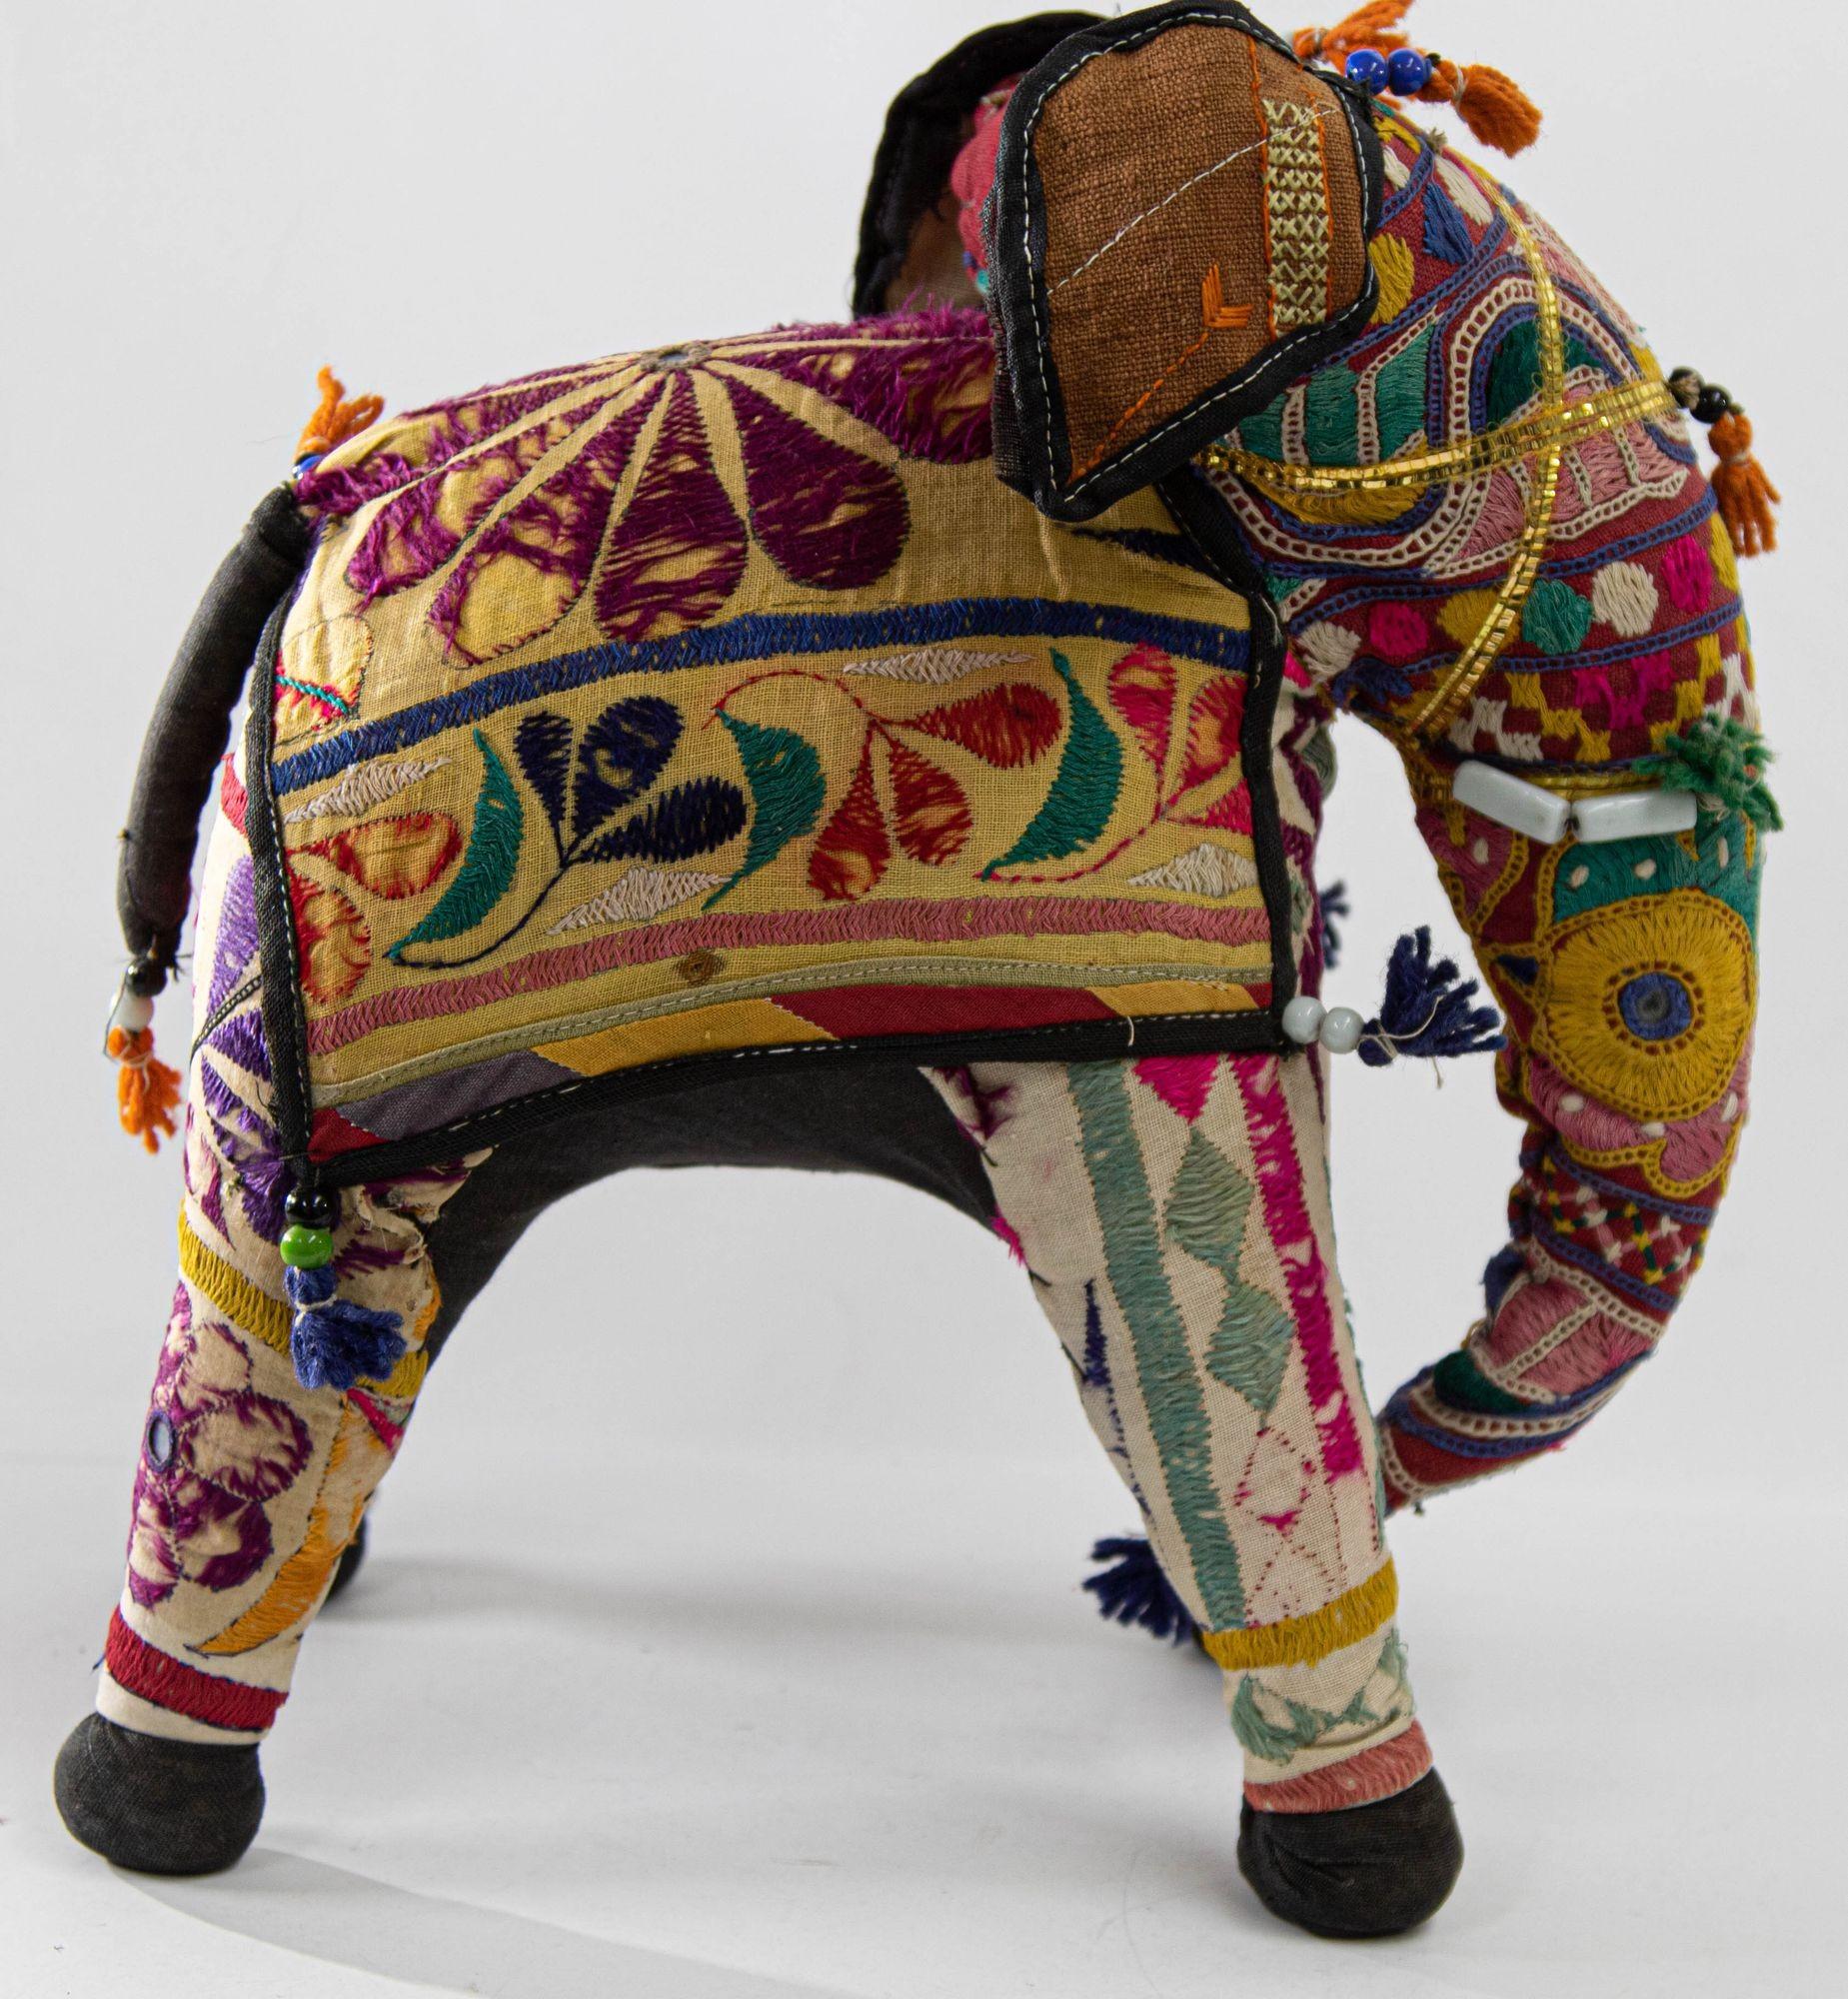 Vintage Handcrafted Stuffed Cotton Embroidered Ceremonial Elephant Toy Raj India en vente 6